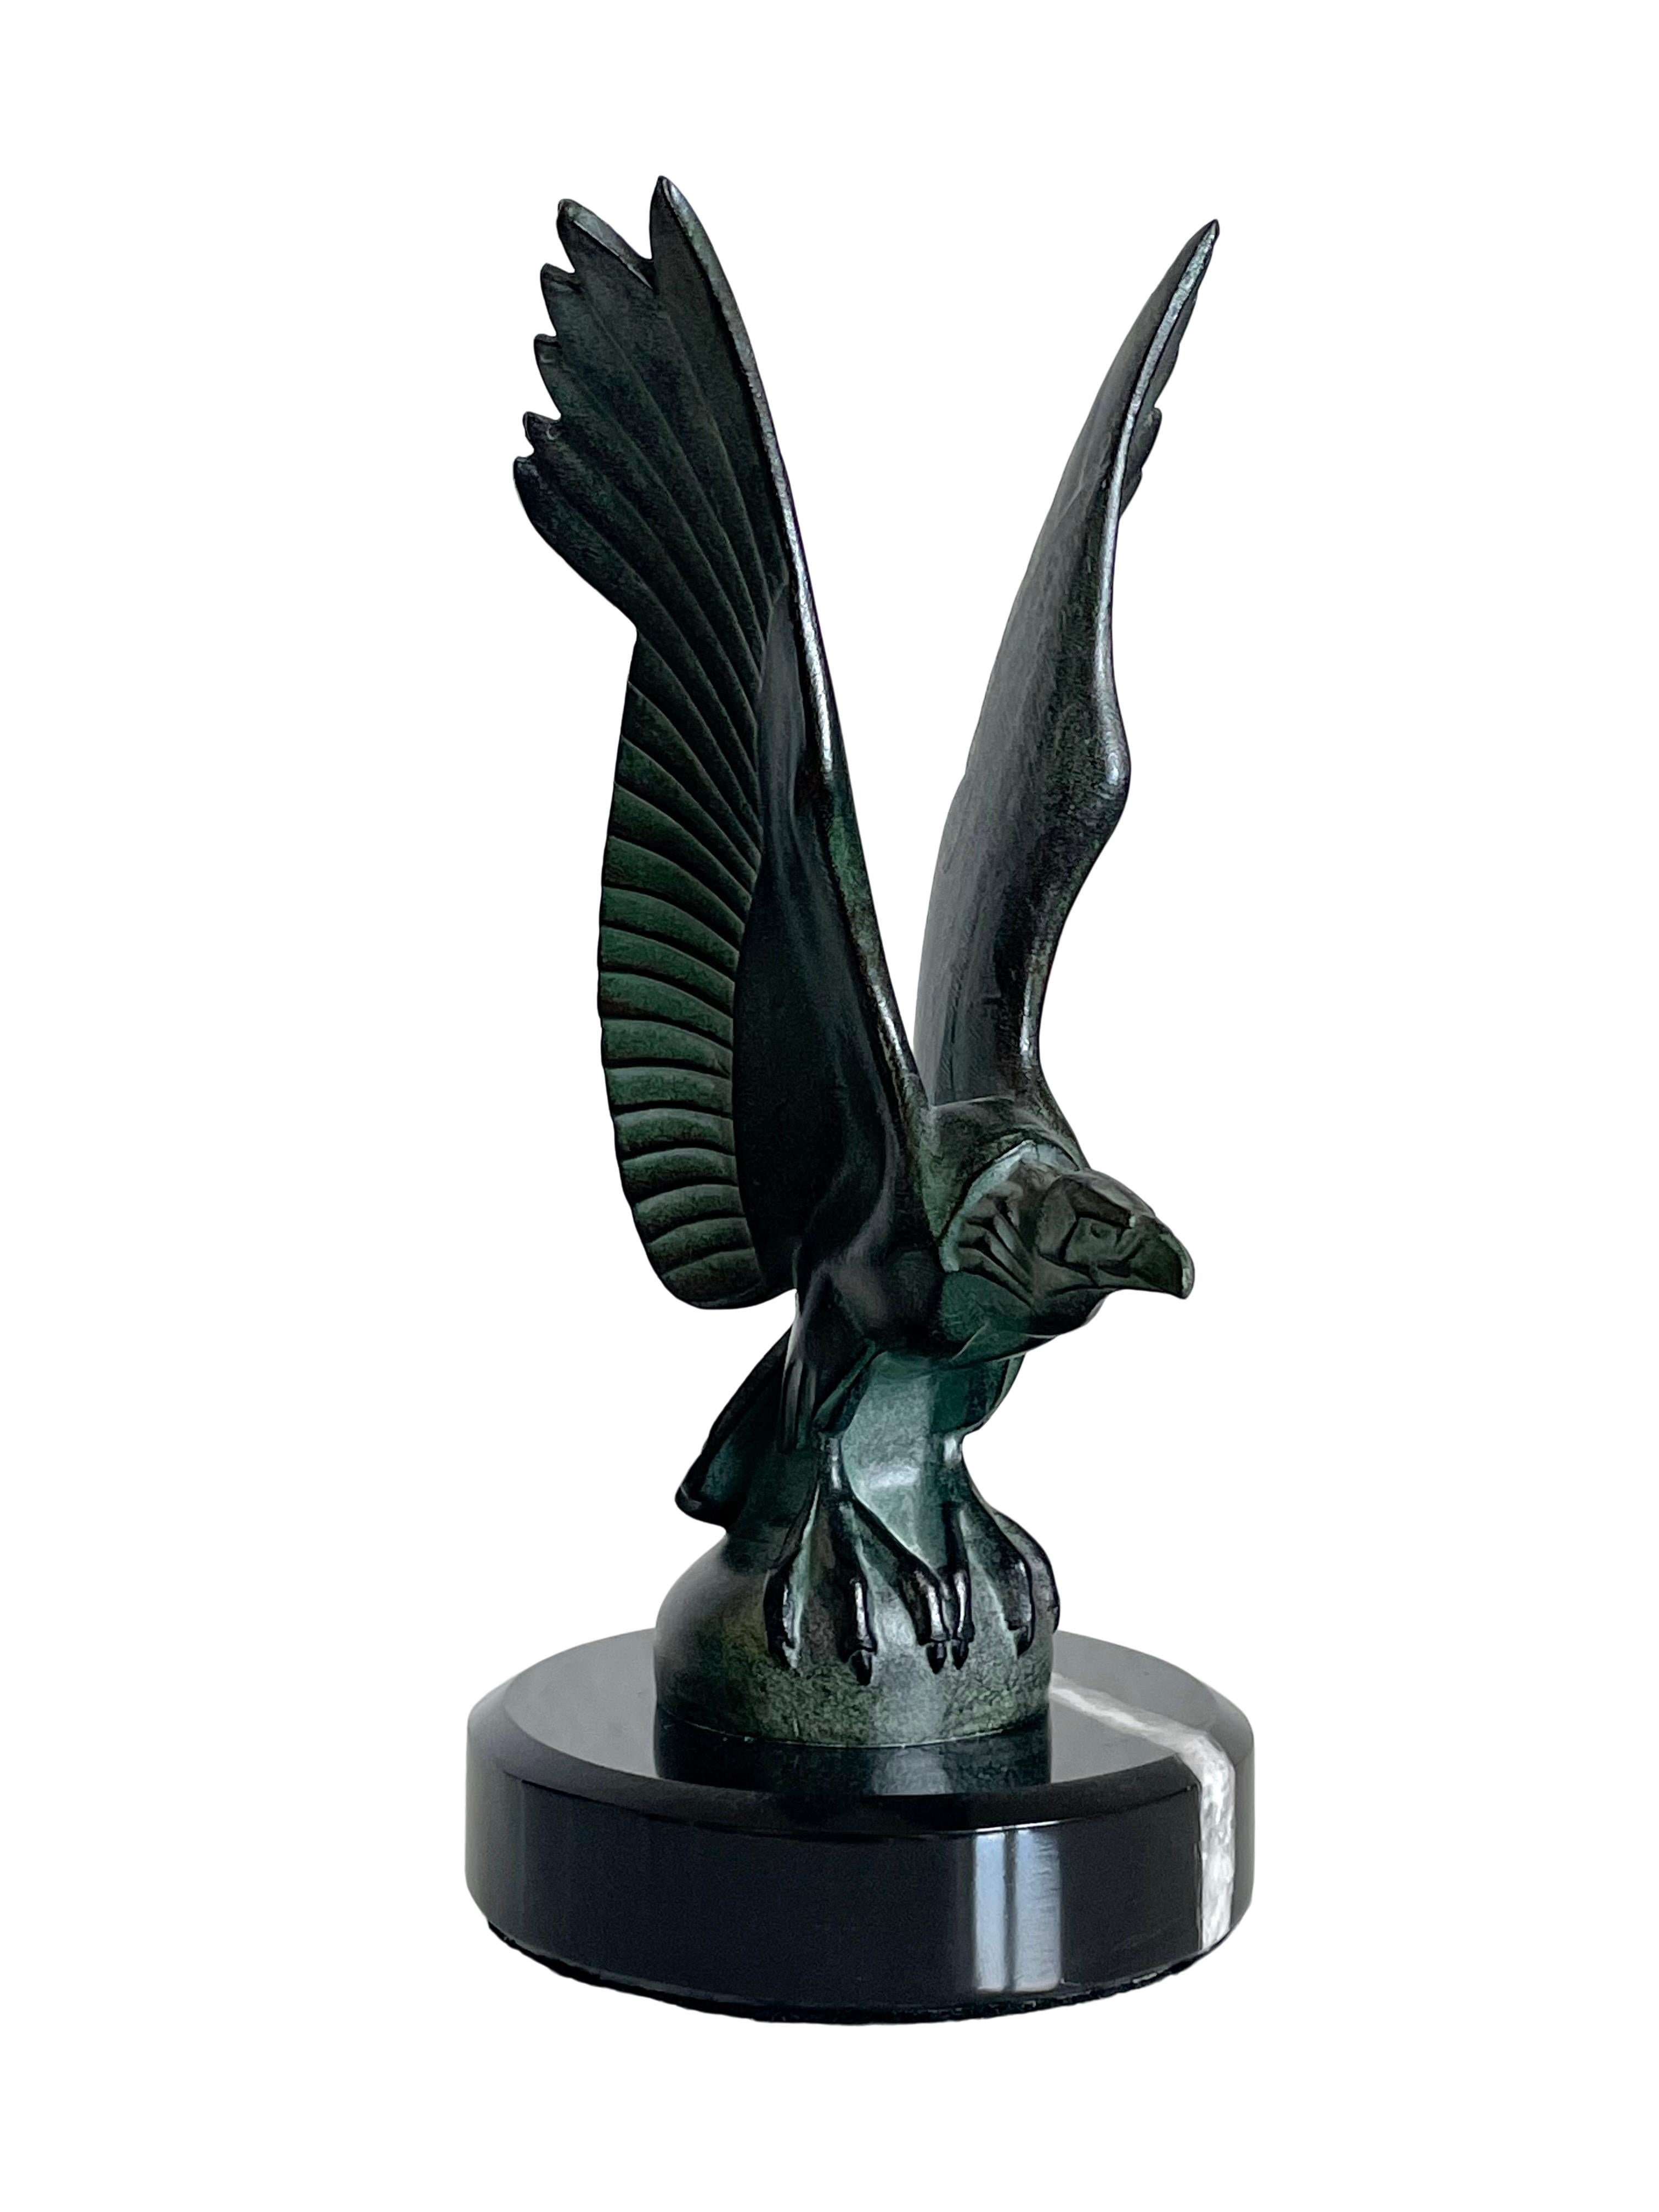 Vautour (french: vulture) 
Animal sculpture of a vulture with outstretched wings

Original “Max Le Verrier”, signed 
Designed in France during the roaring 1920s by “Max Le Verrier” (1891-1973) 
Art Deco style, France

Sculpture made in